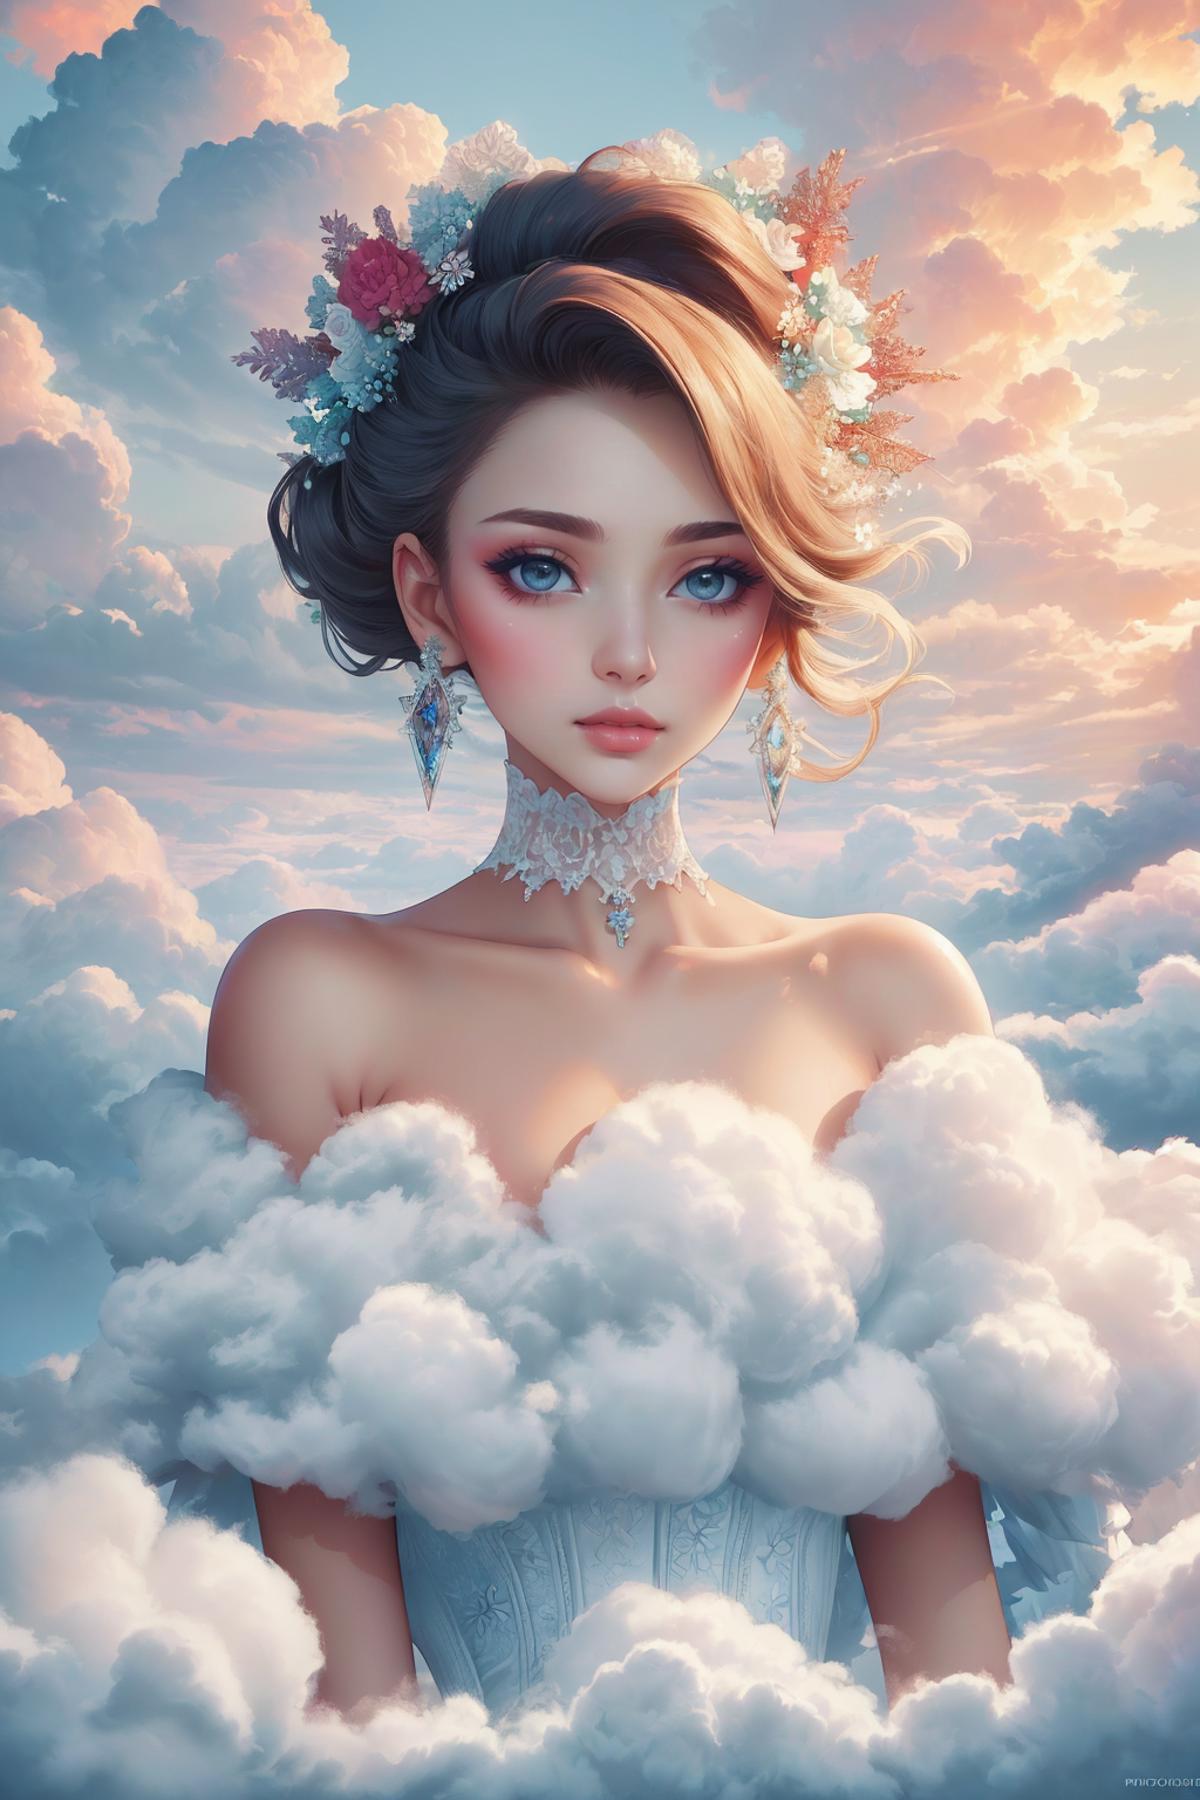 A Digital Artwork of a Girl with Blue Eyes and Clouds.